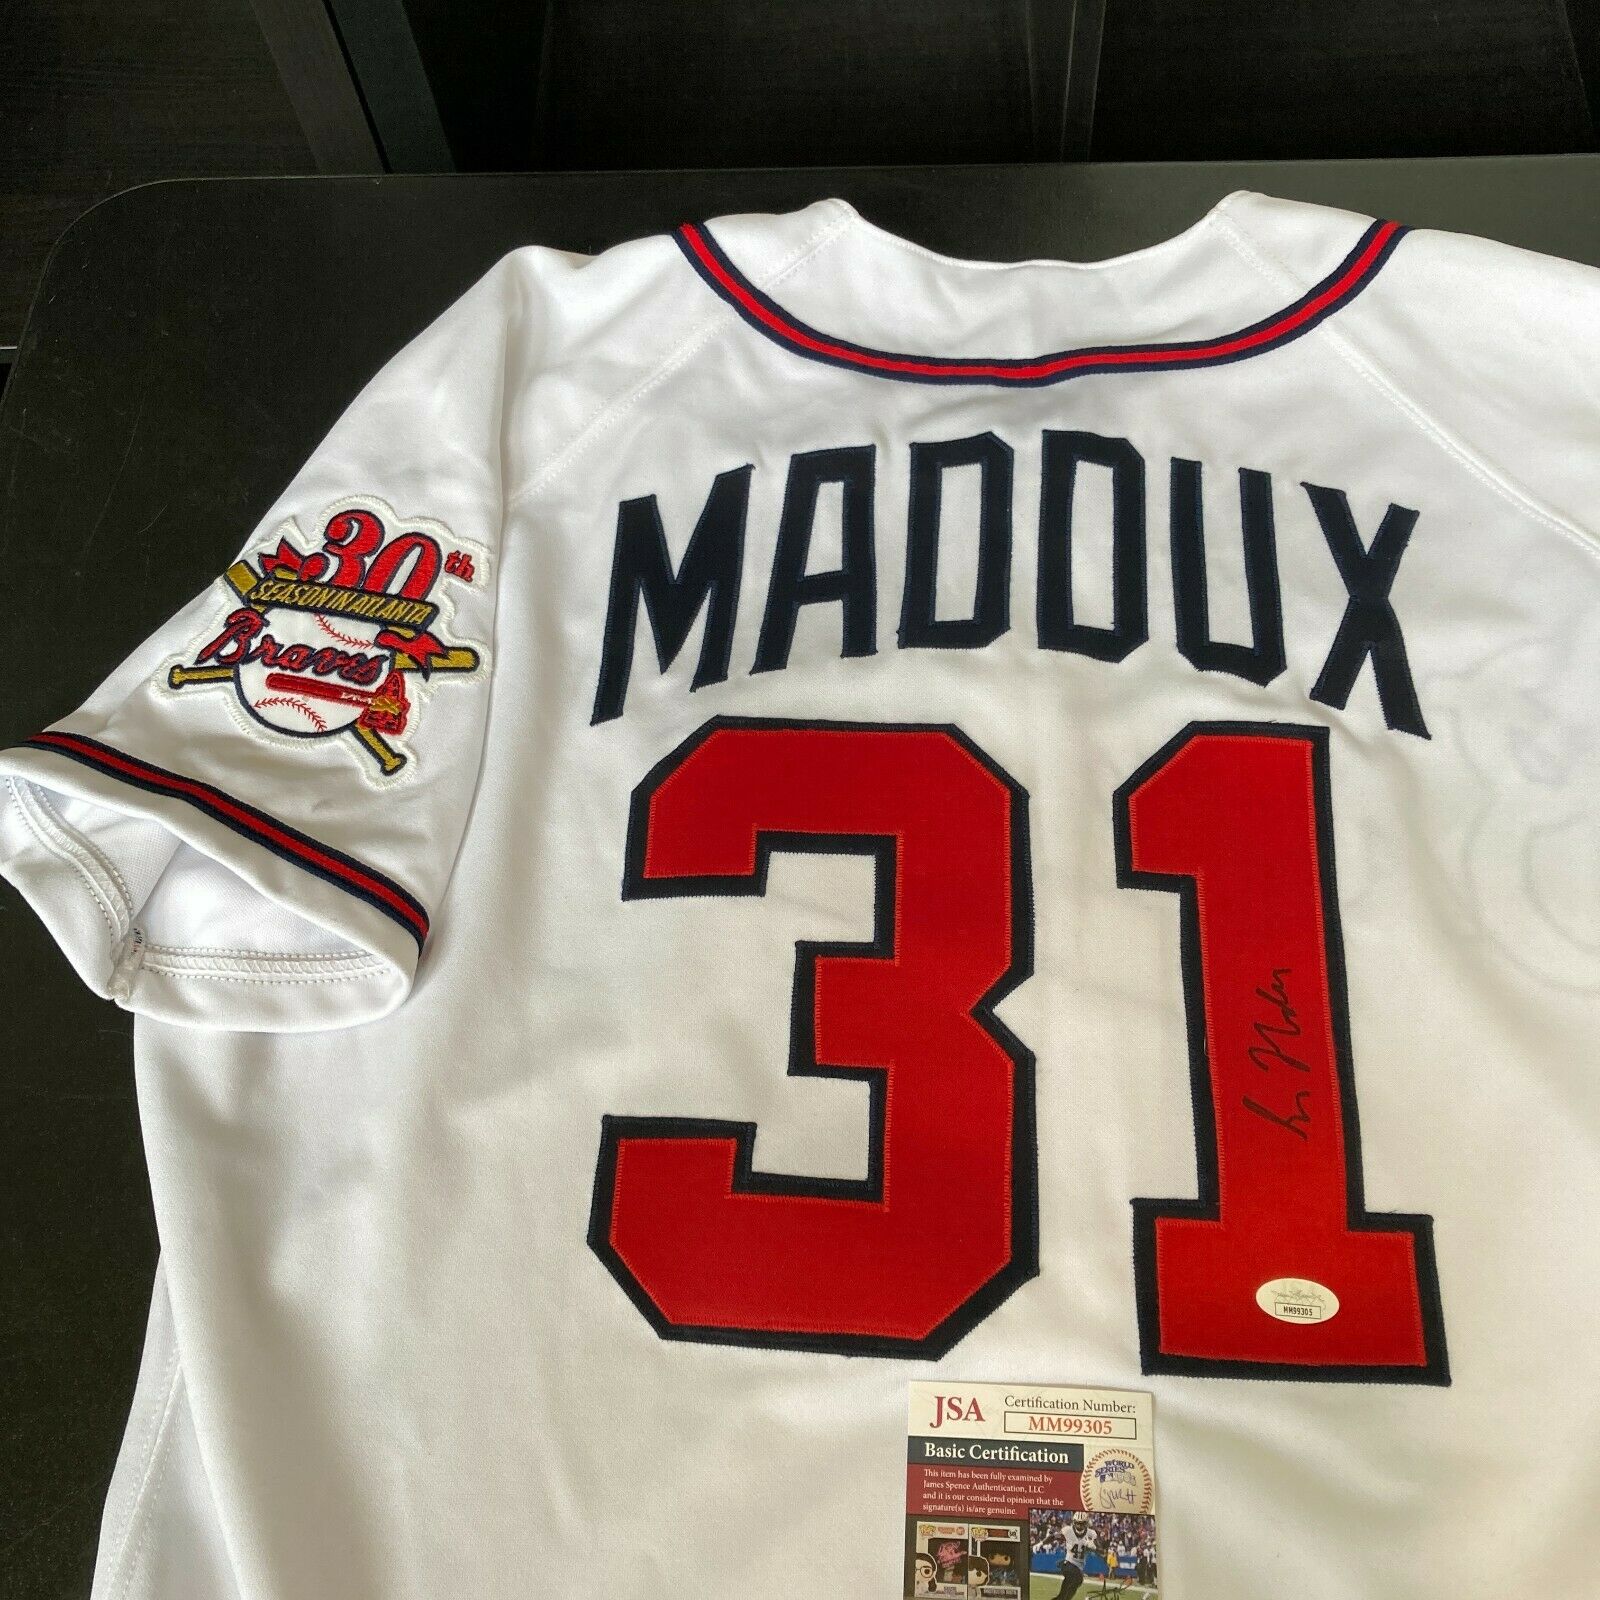 maddux game used jersey